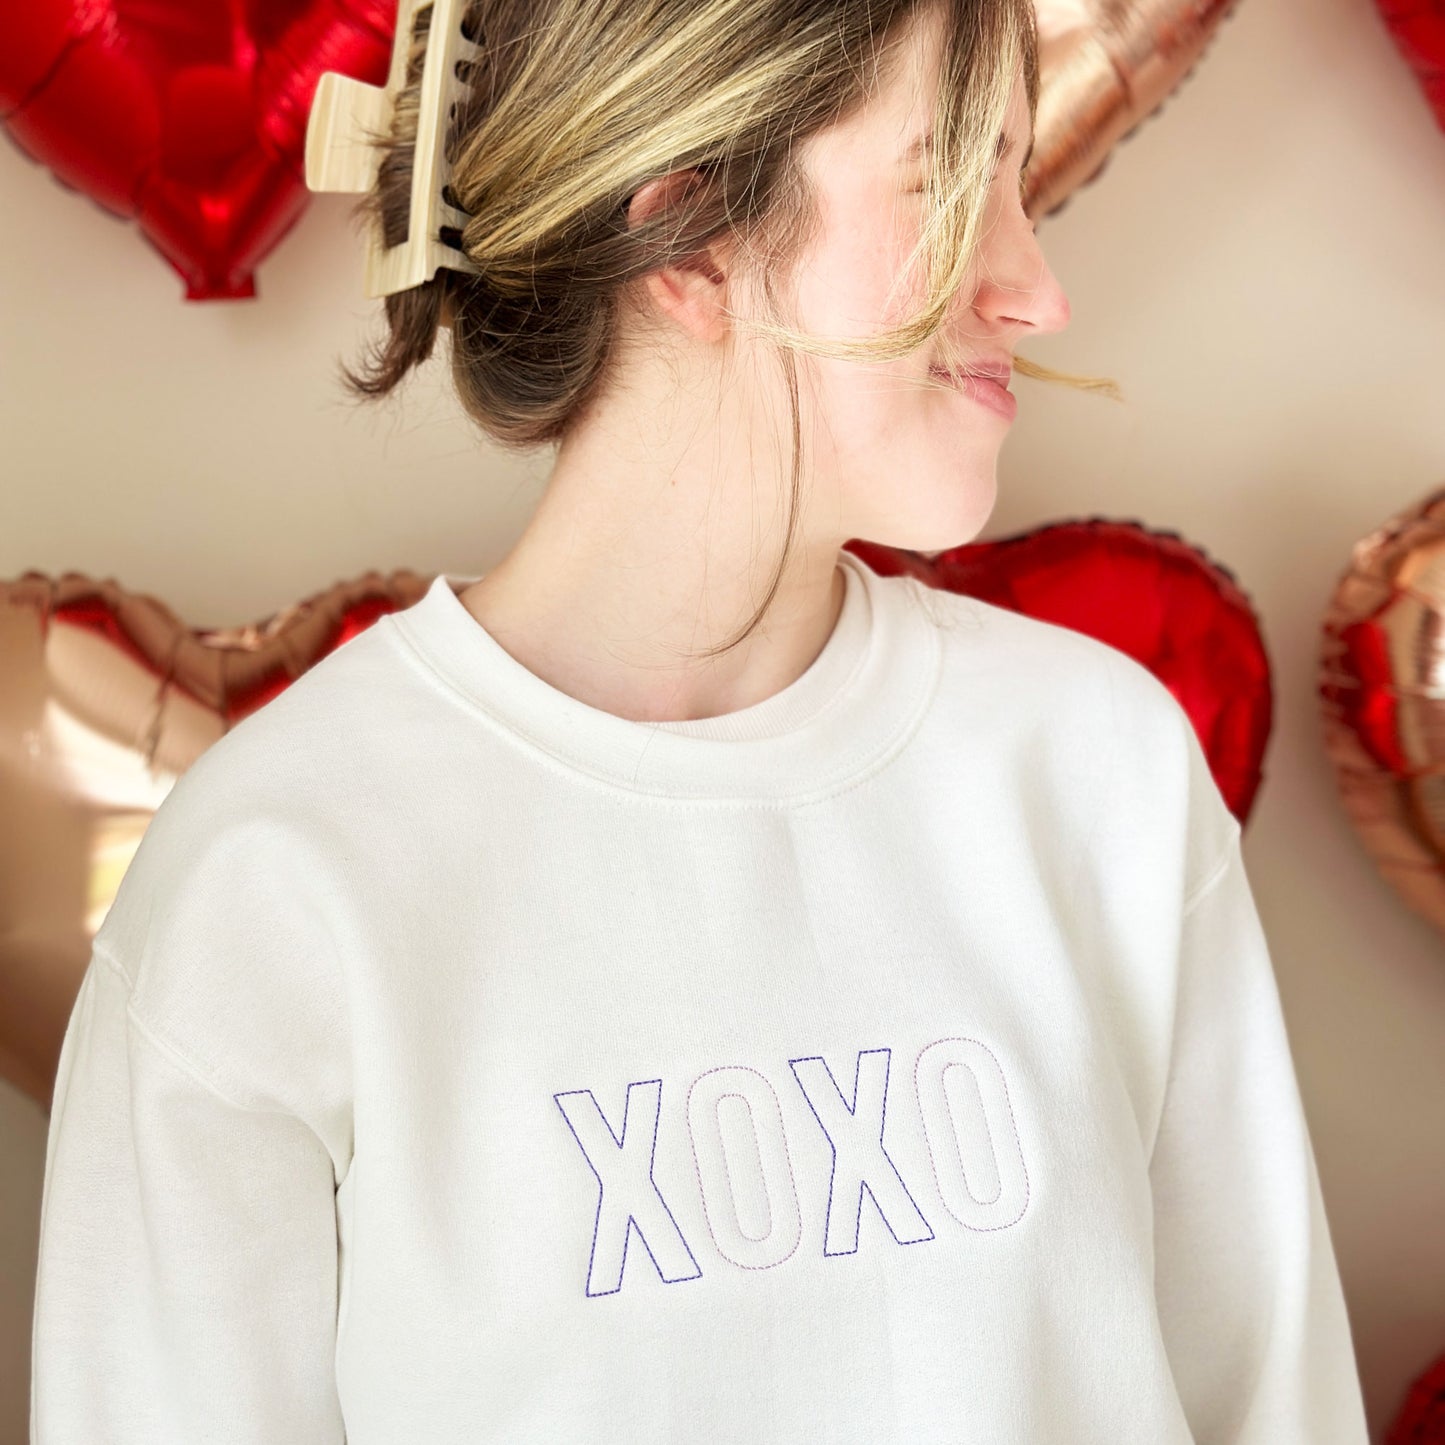 young woman wearing a white crewneck sweatshirt that features purple and lilac stitched xoxo design embroidered across the chest